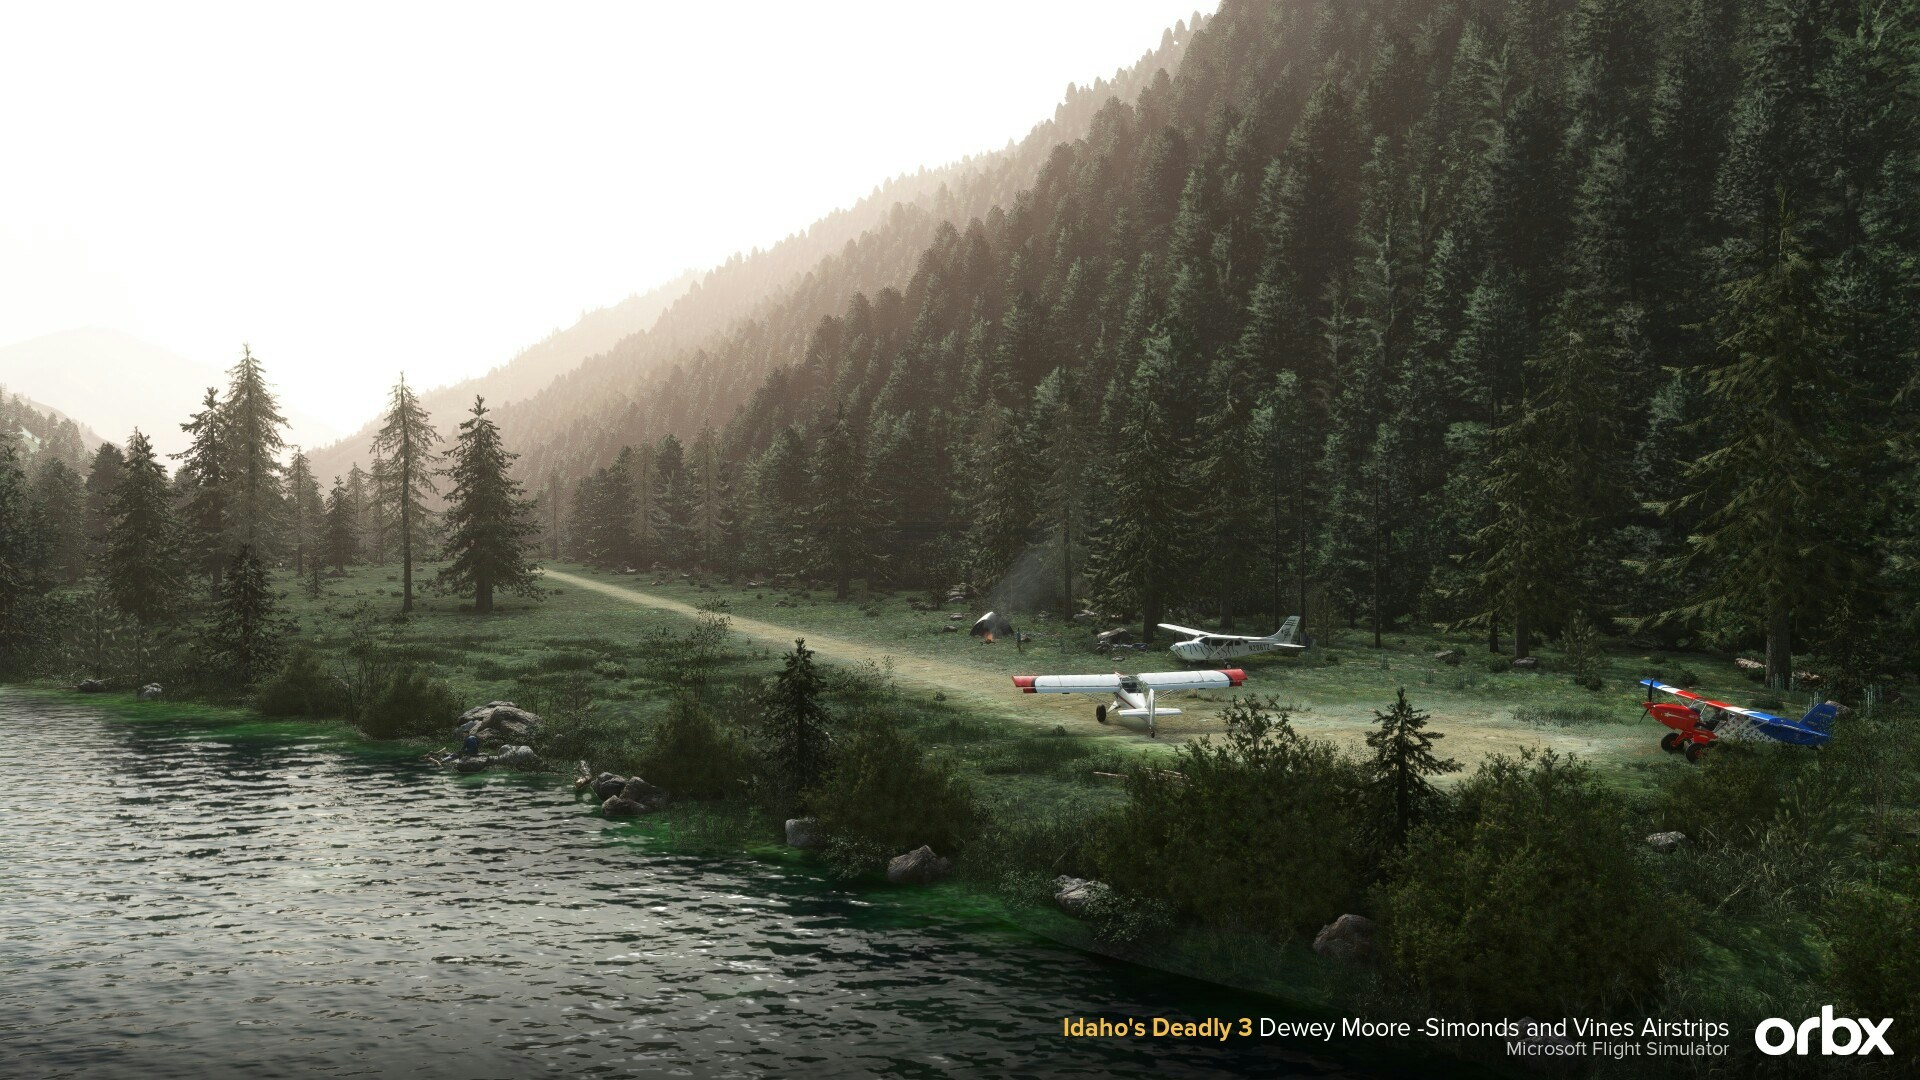 Orbx Releases its Idaho's Deadly 3 for MSFS